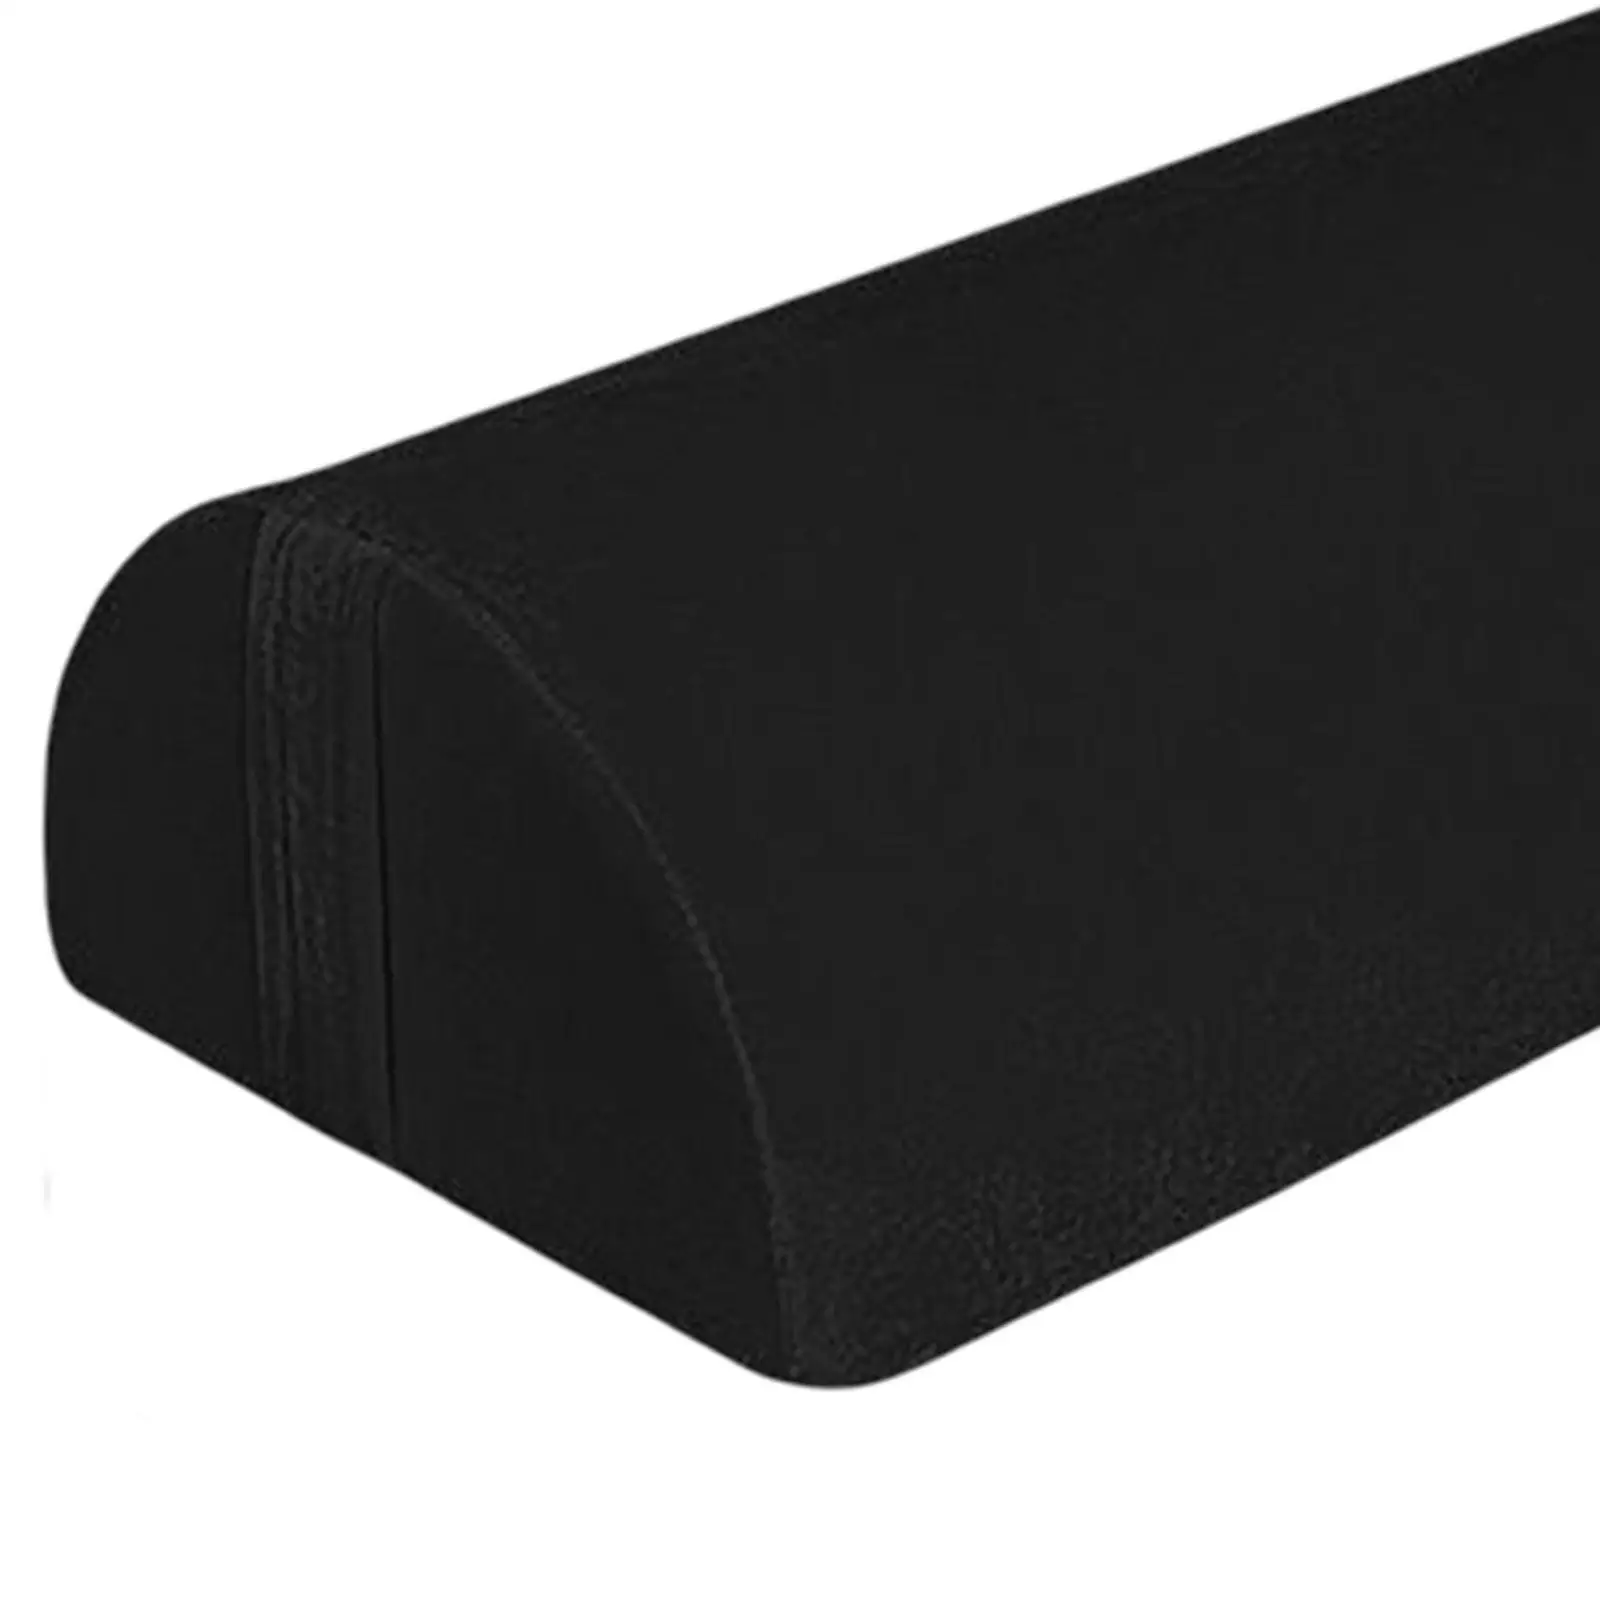 Comfort Foot Stool Feet Cushion Soft Non Slip Leg Support pillow for Work Computer Piano Office Accessories Bed